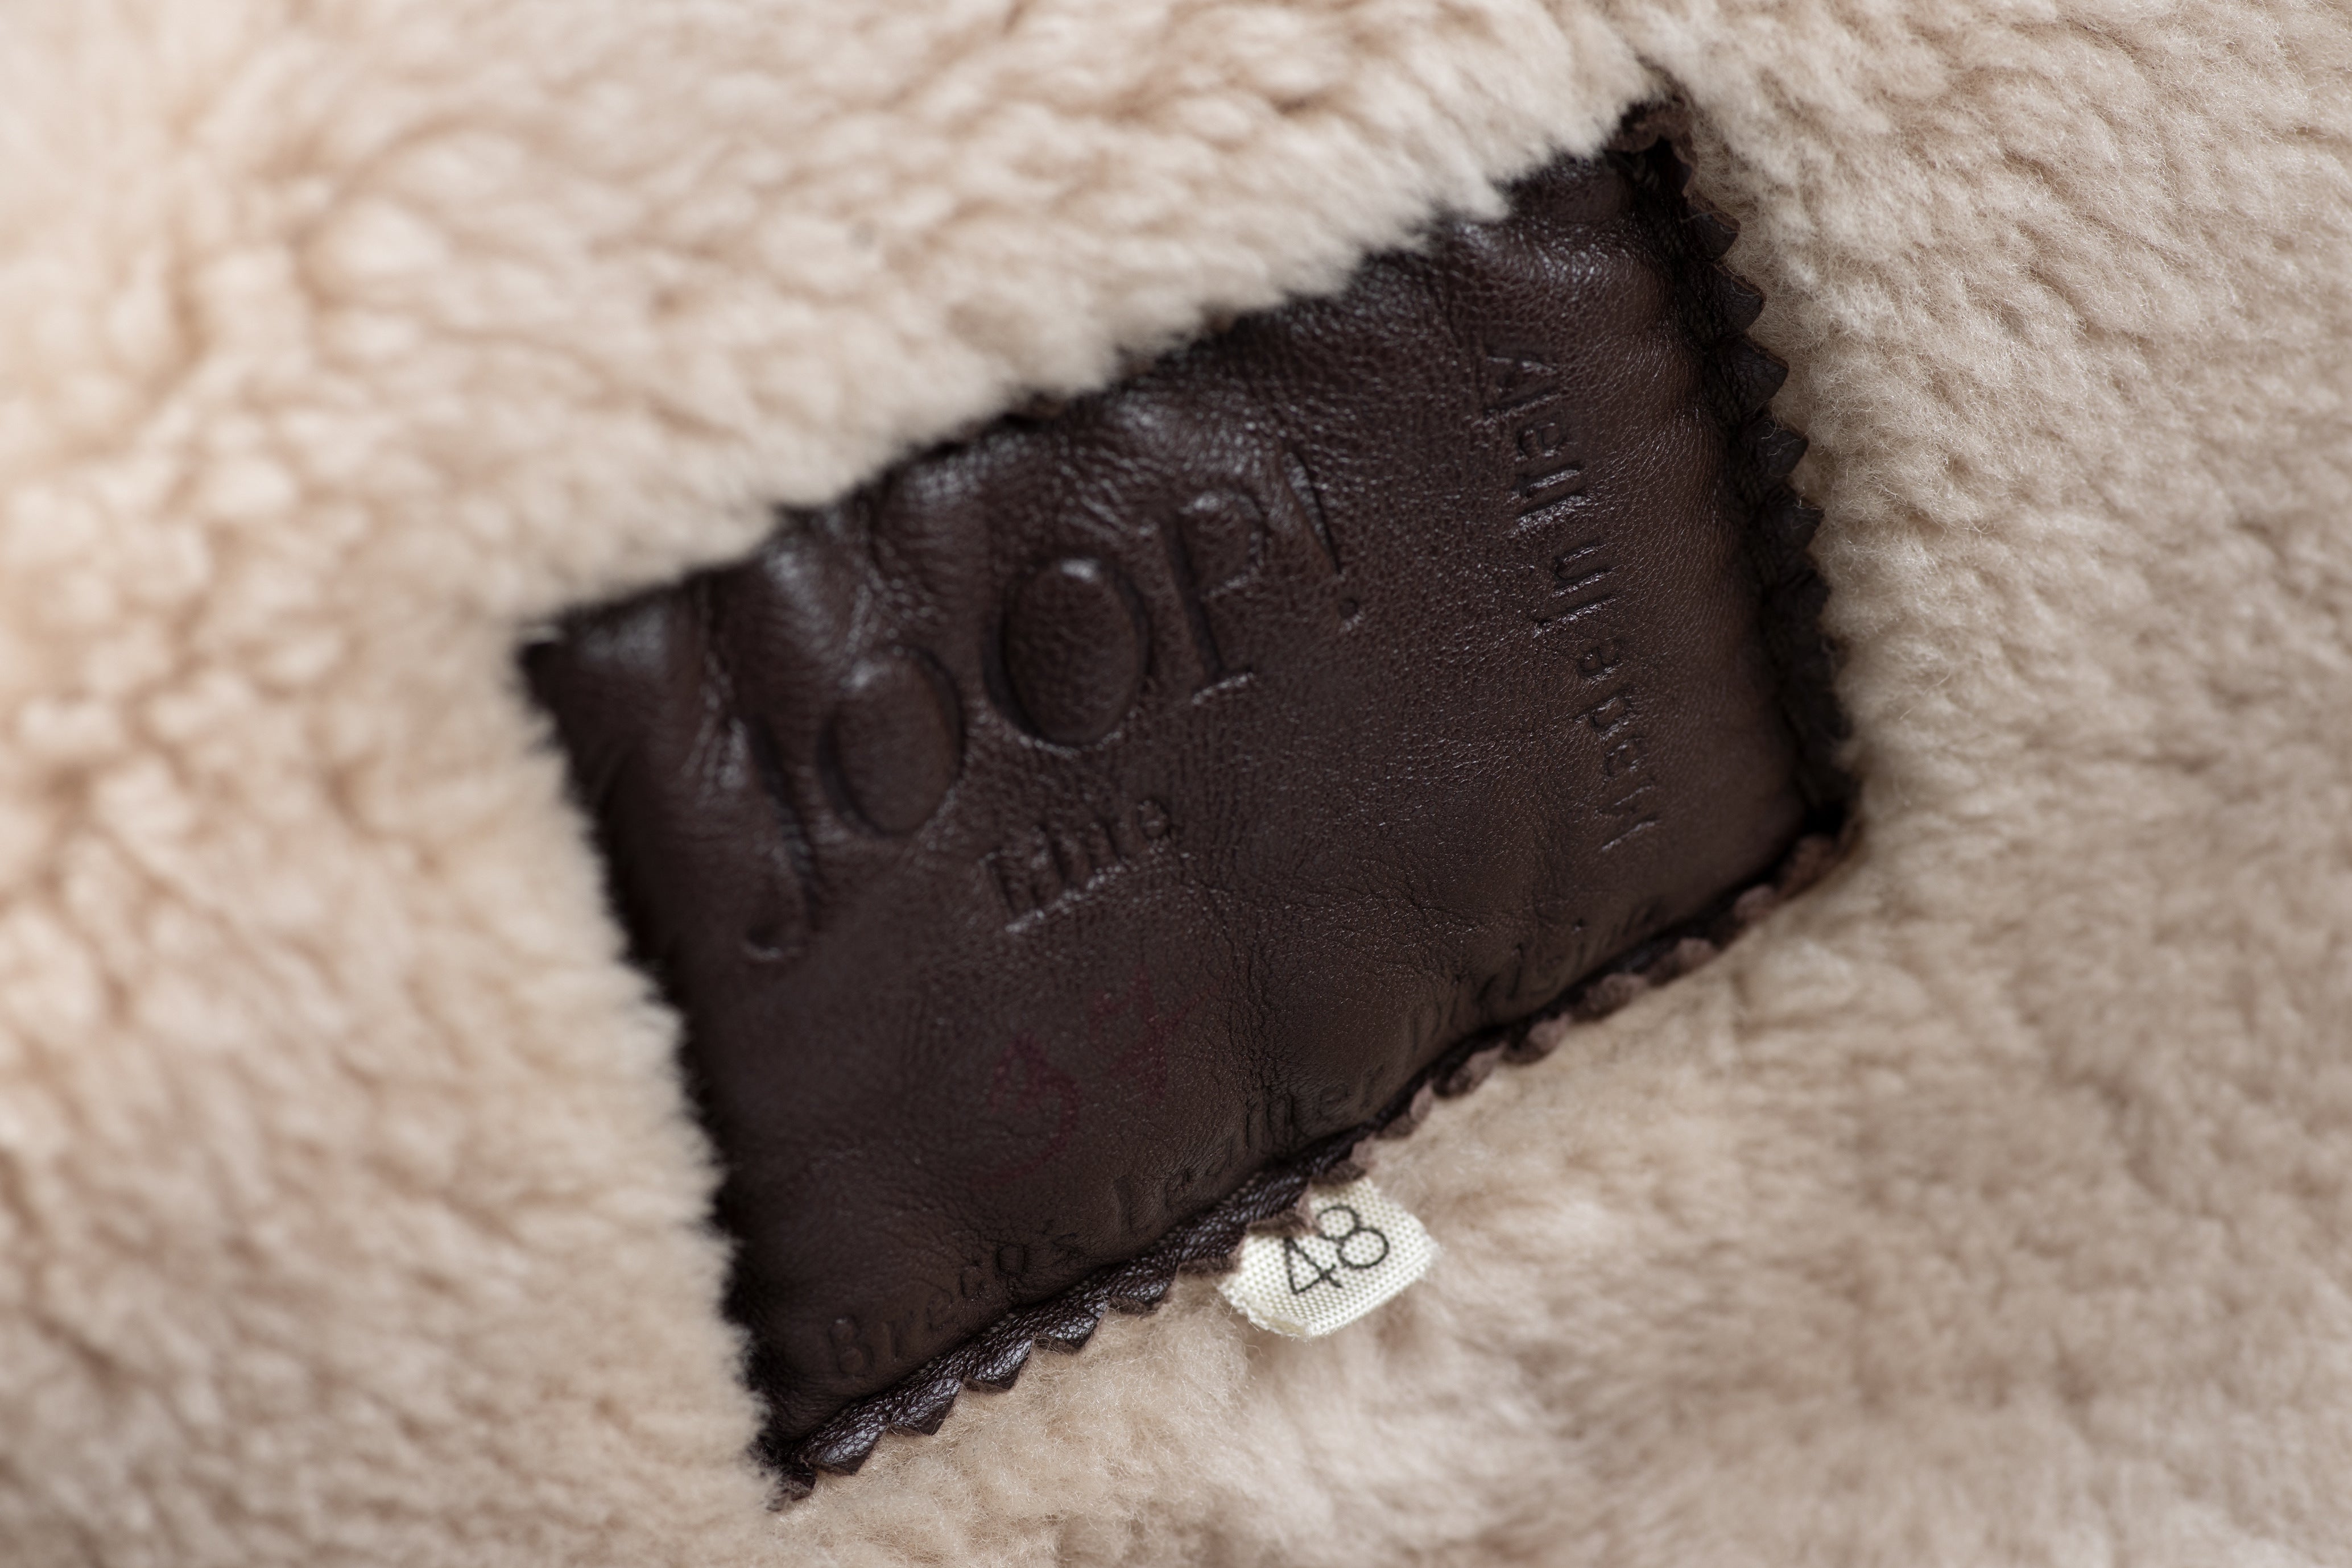 Joop Men's Brown Supple Leather Shearling Coat with Shawl Collar, L